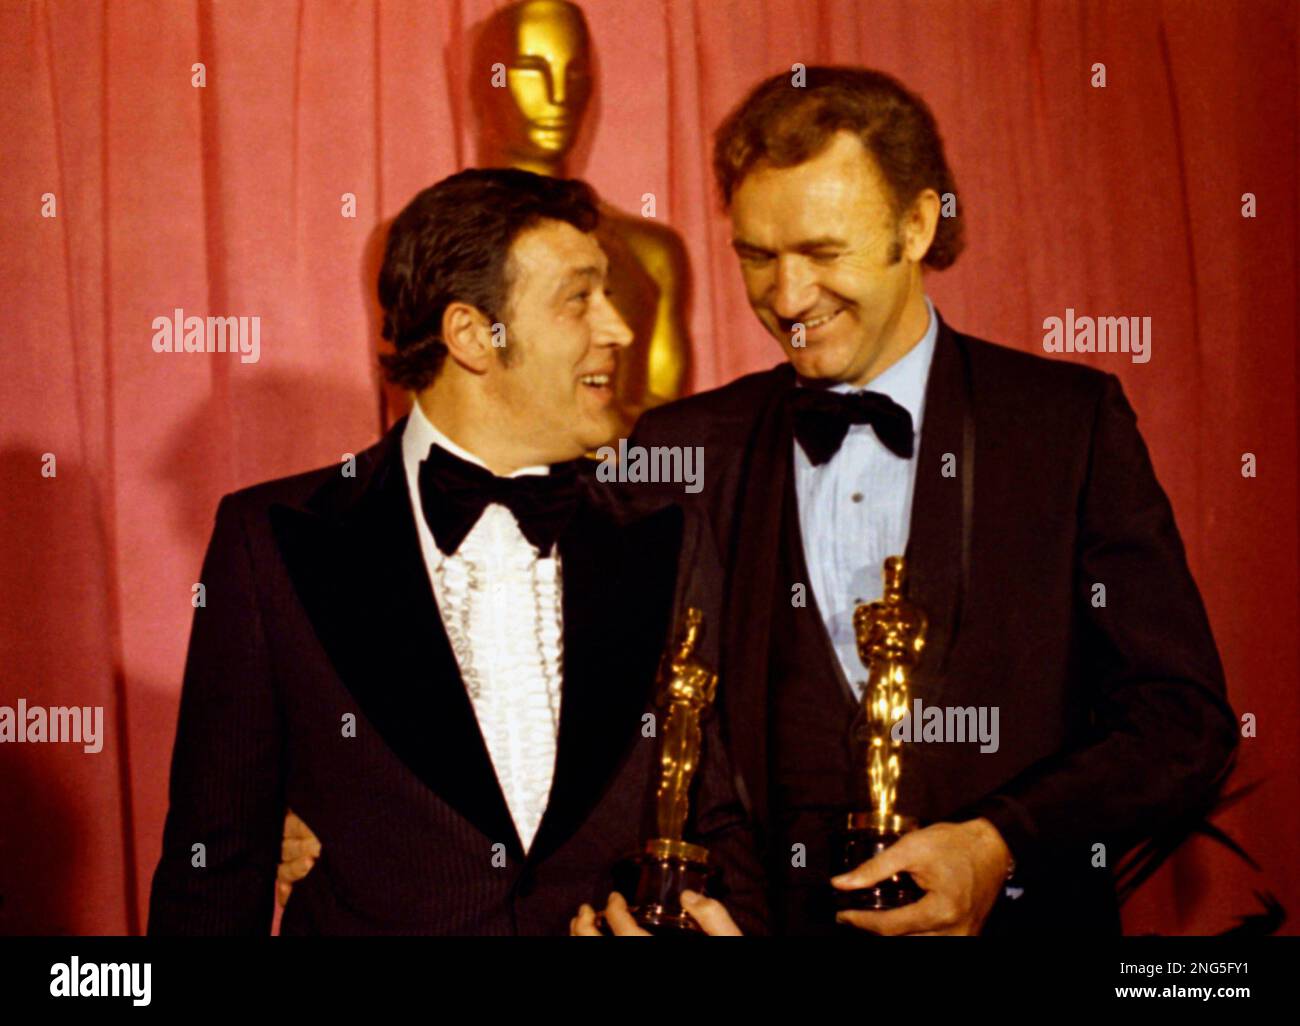 Philip D'Antoni wins an Oscar for The French Connection and Gene Hackman  wins for best actor at the Academy Awards, March 27, 1971 at the Dorothy  Chandler Pavilion, Los Angeles. (AP Photo